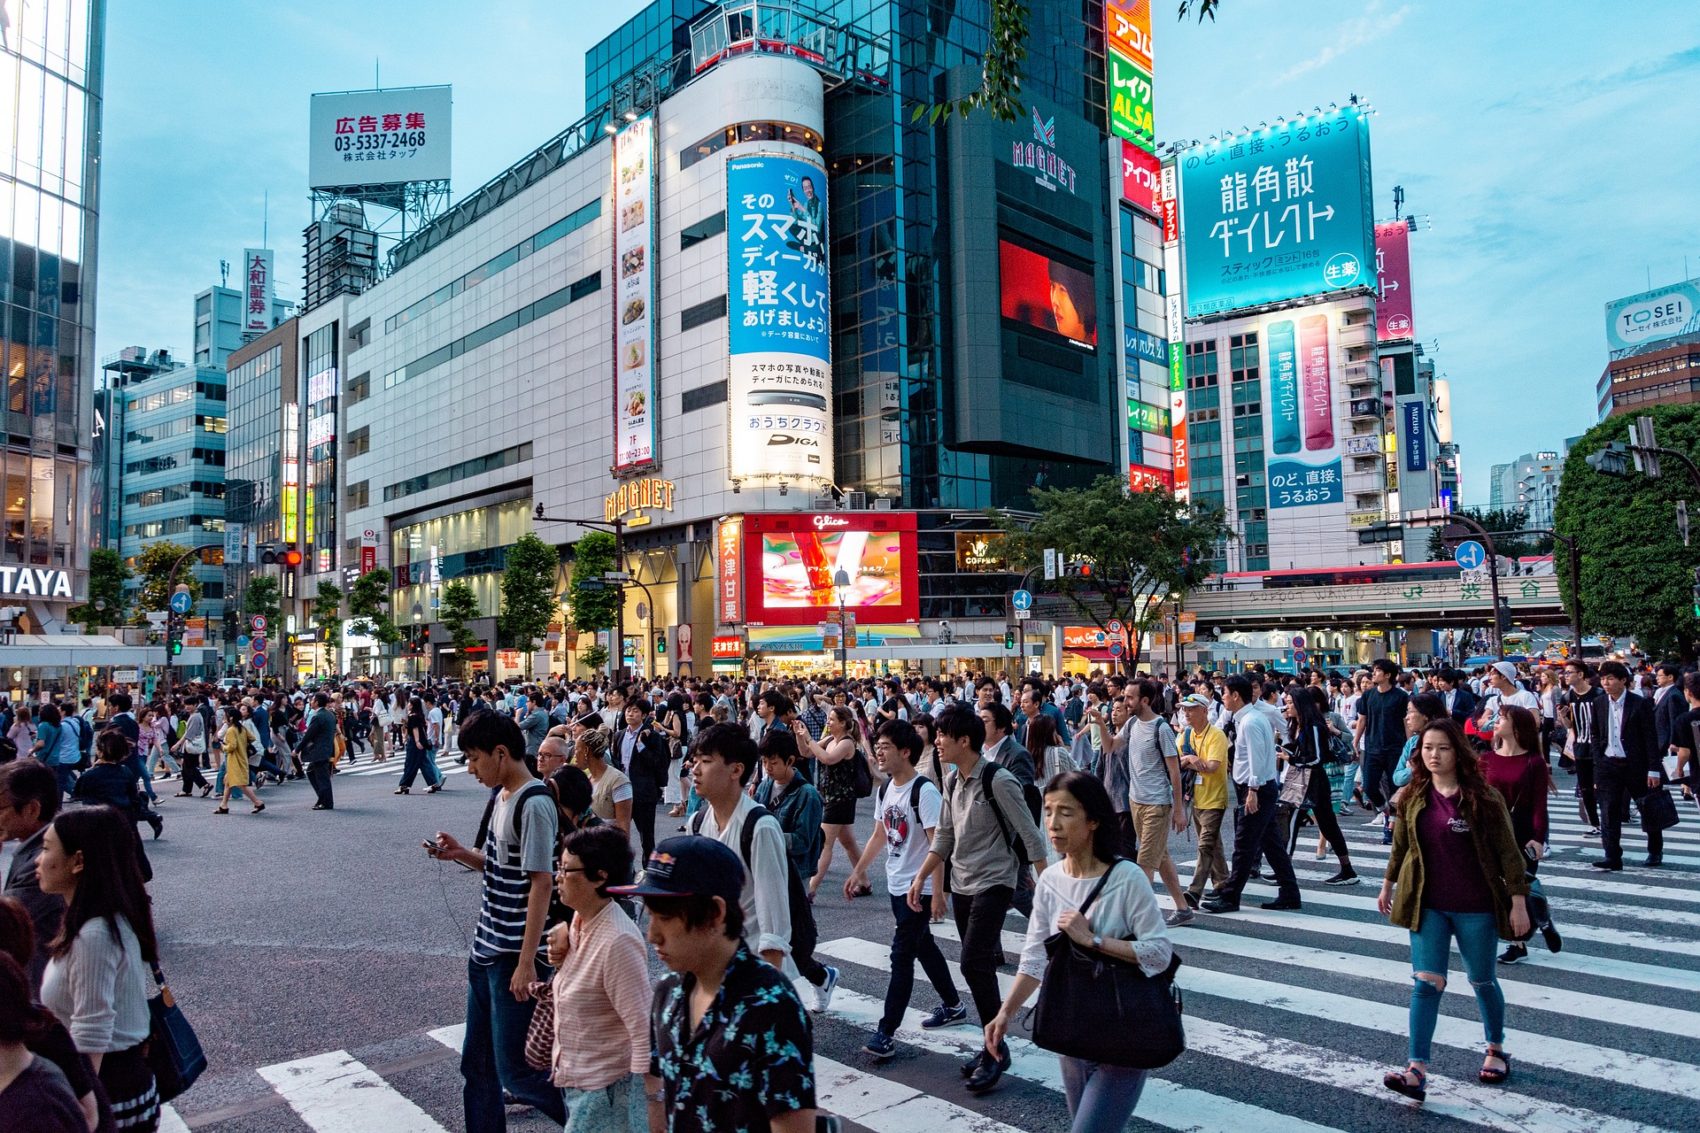 Four reasons for Japan equities in 2021